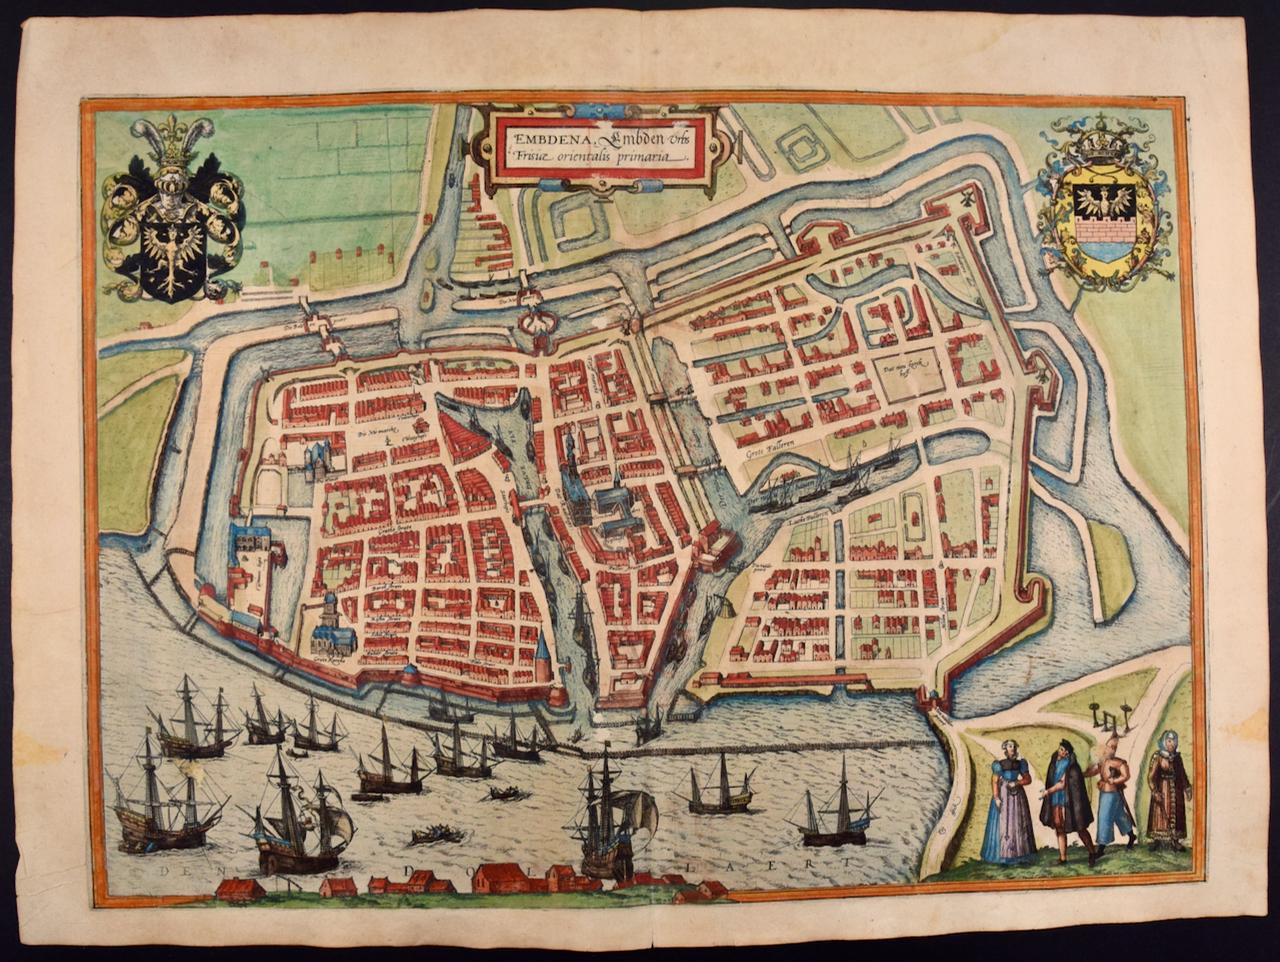  View of Emden, Germany: A 16th Century Hand-colored Map by Braun & Hogenberg